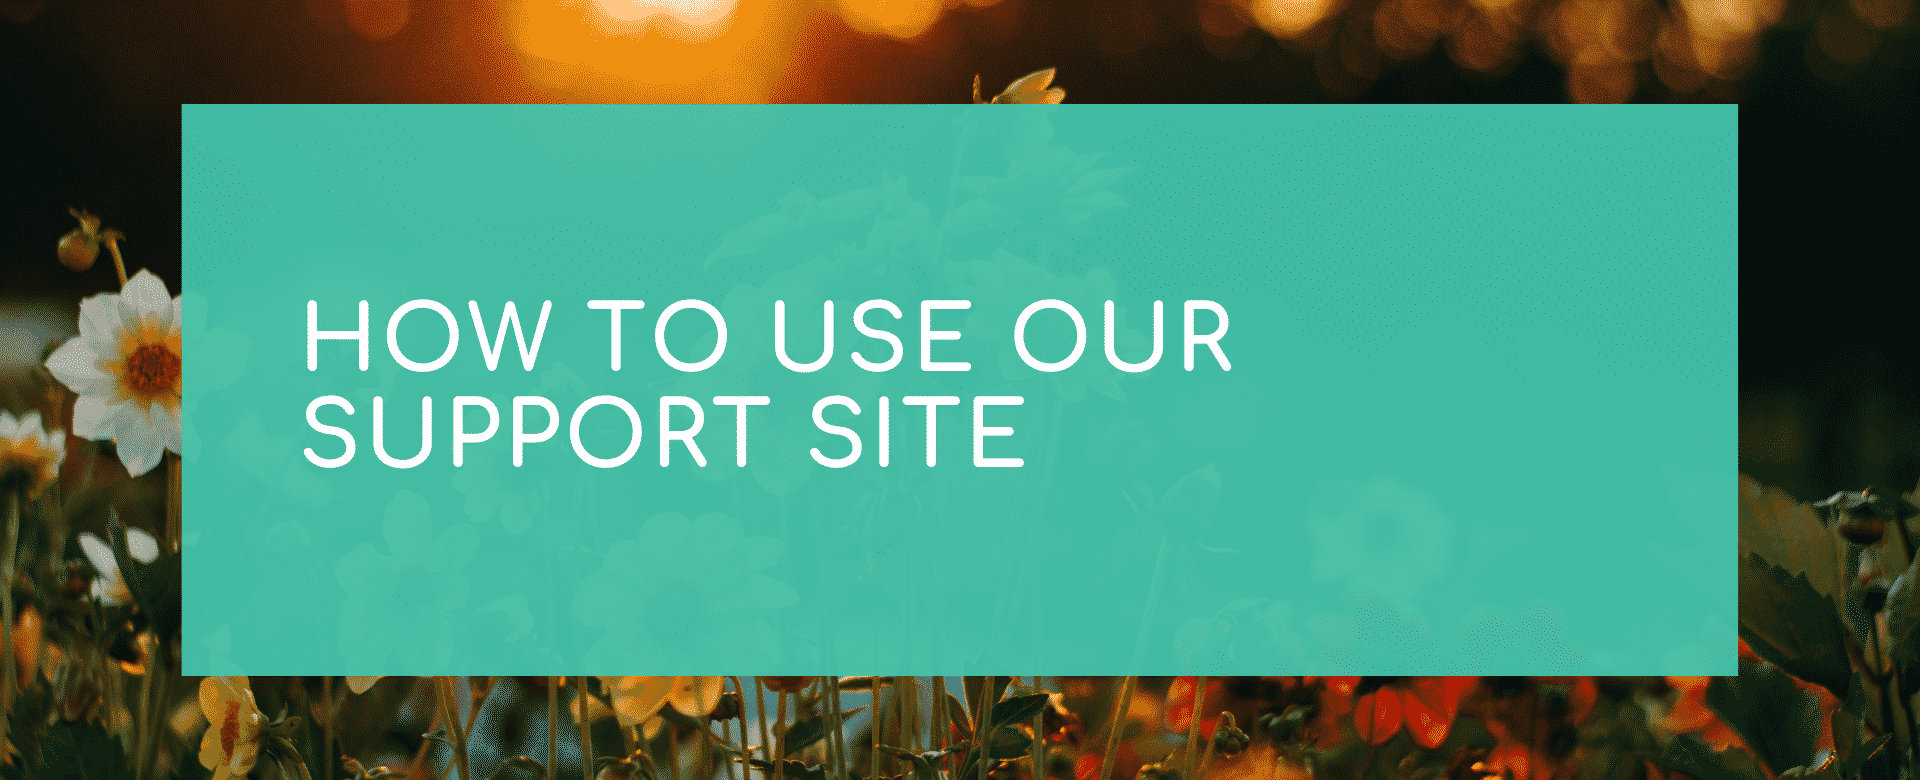 How to use our support site